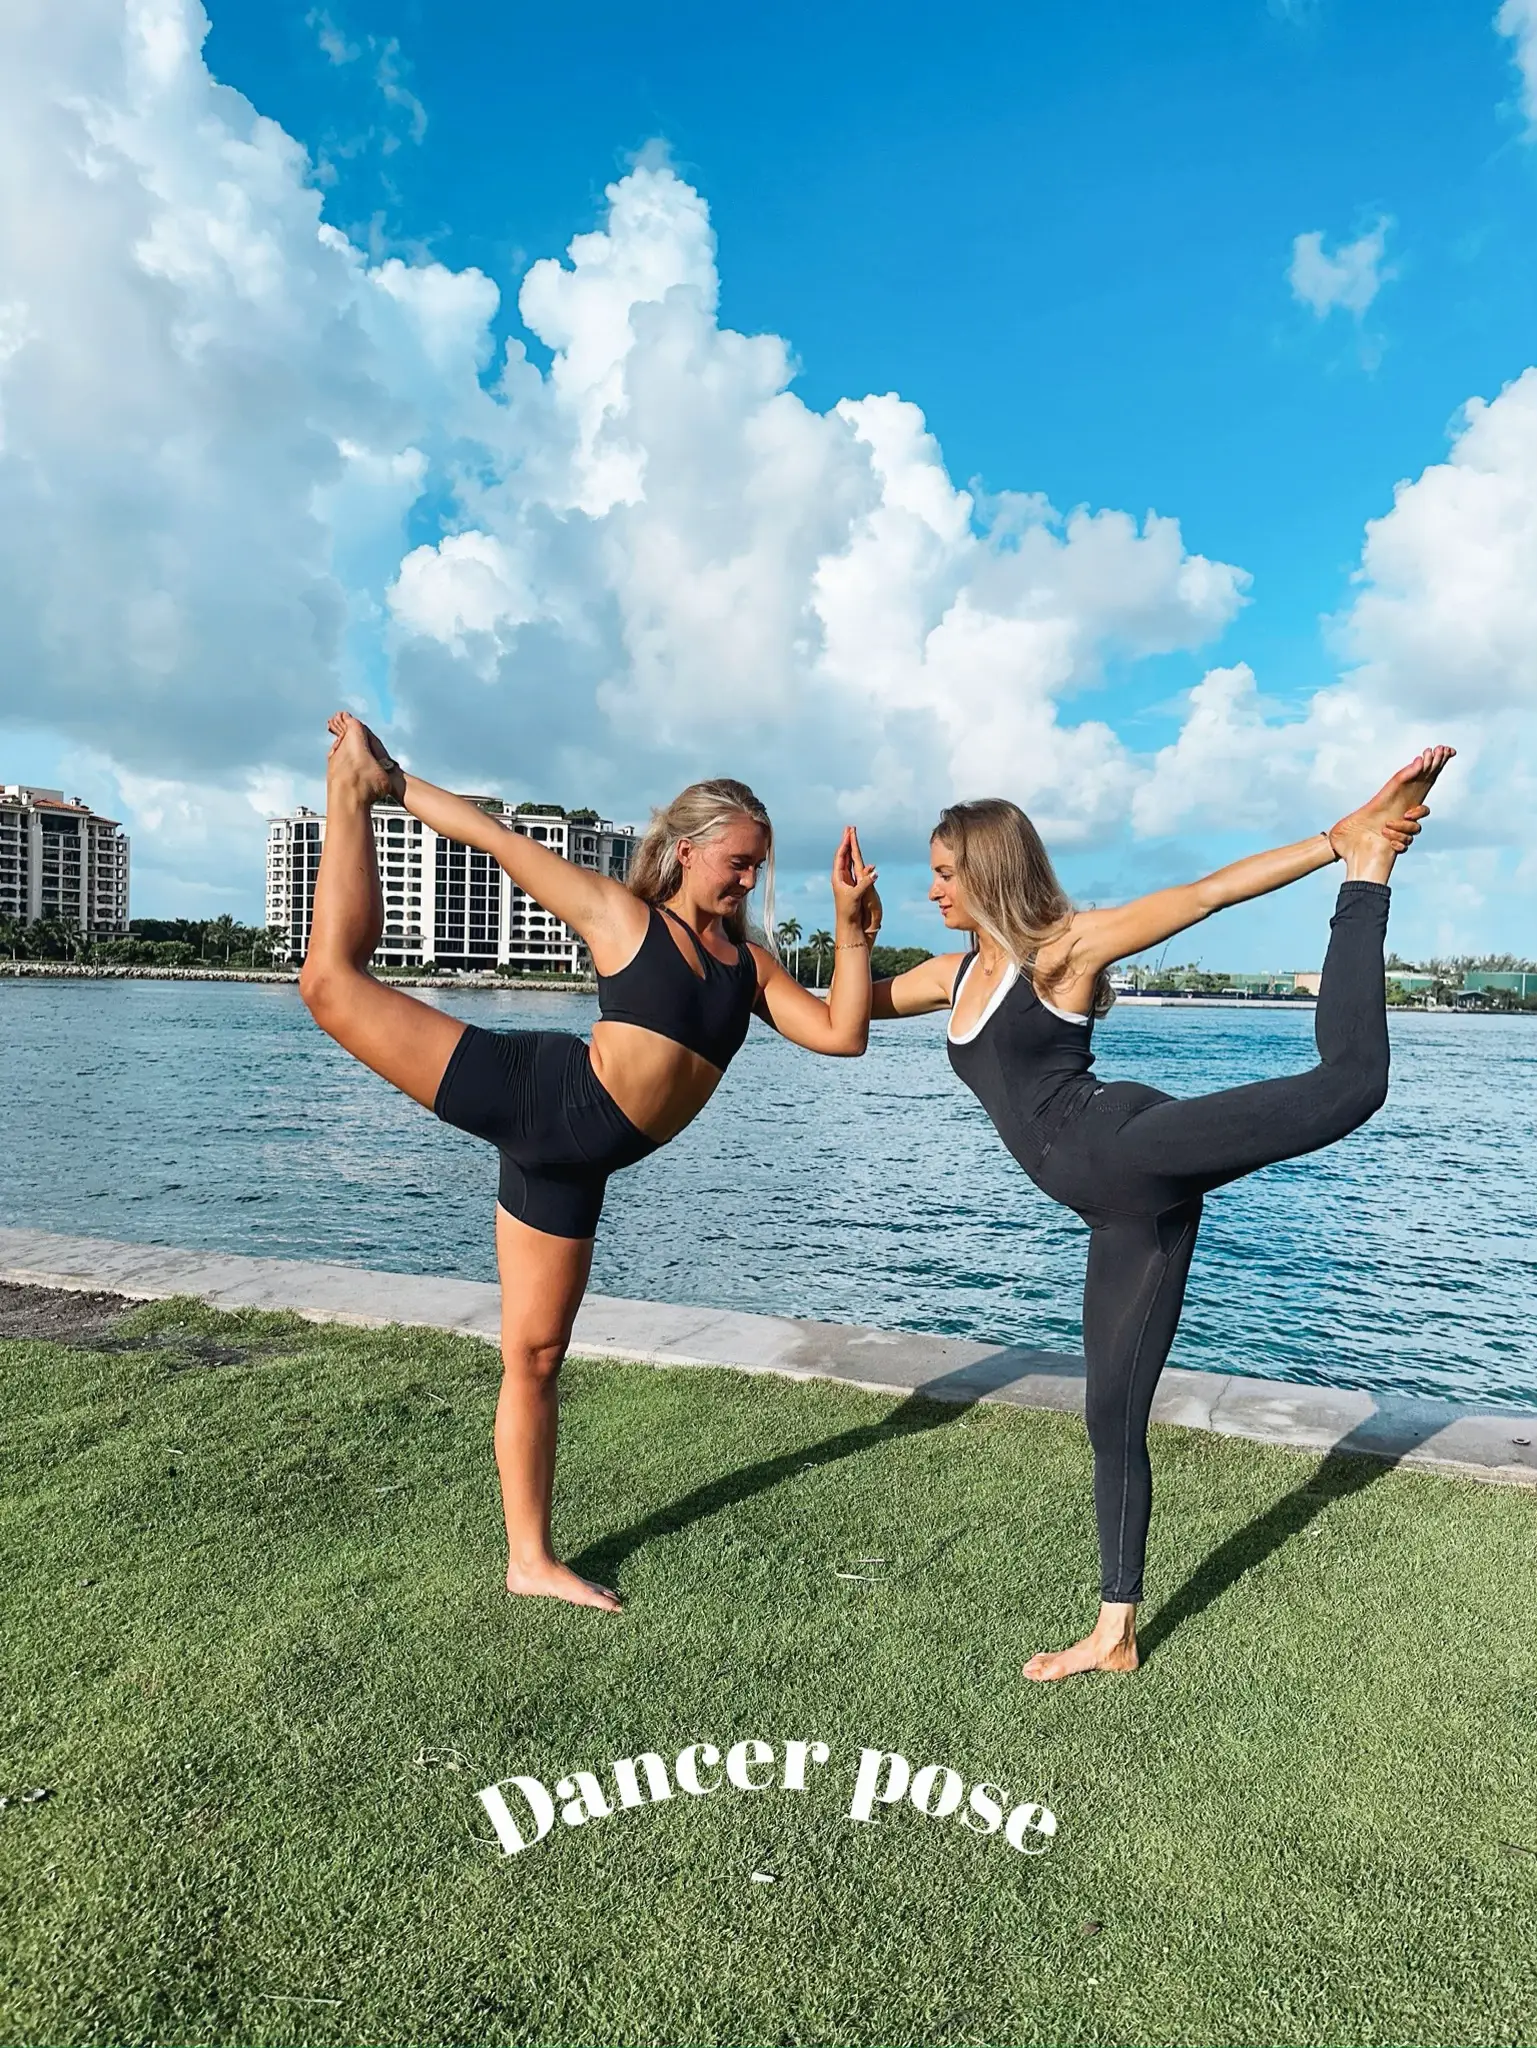 WILD THING TO WHEEL POSE 🤩 learn how to do this fun yoga transition!